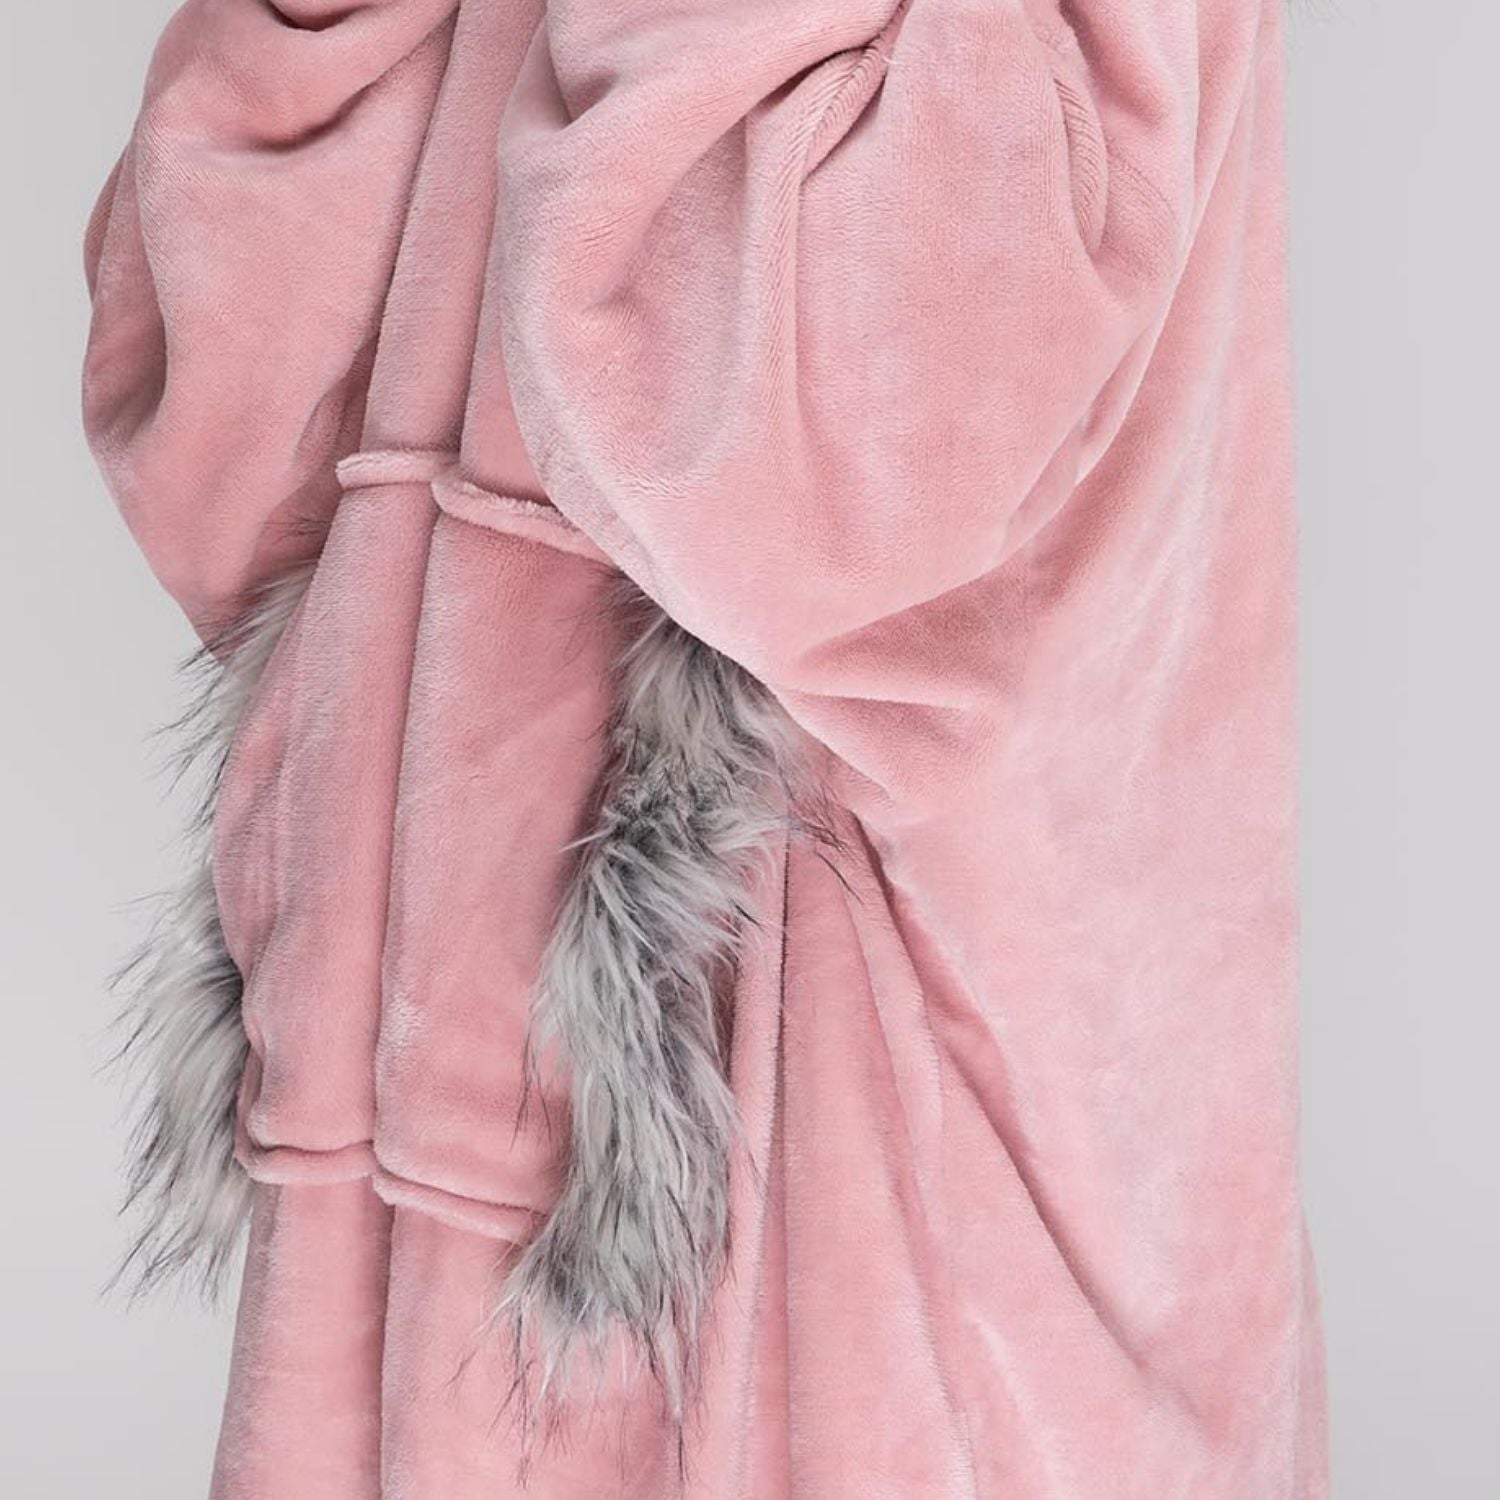 The Home Bedroom Fur Trim Cosy Robe - Pink 2 Shaws Department Stores